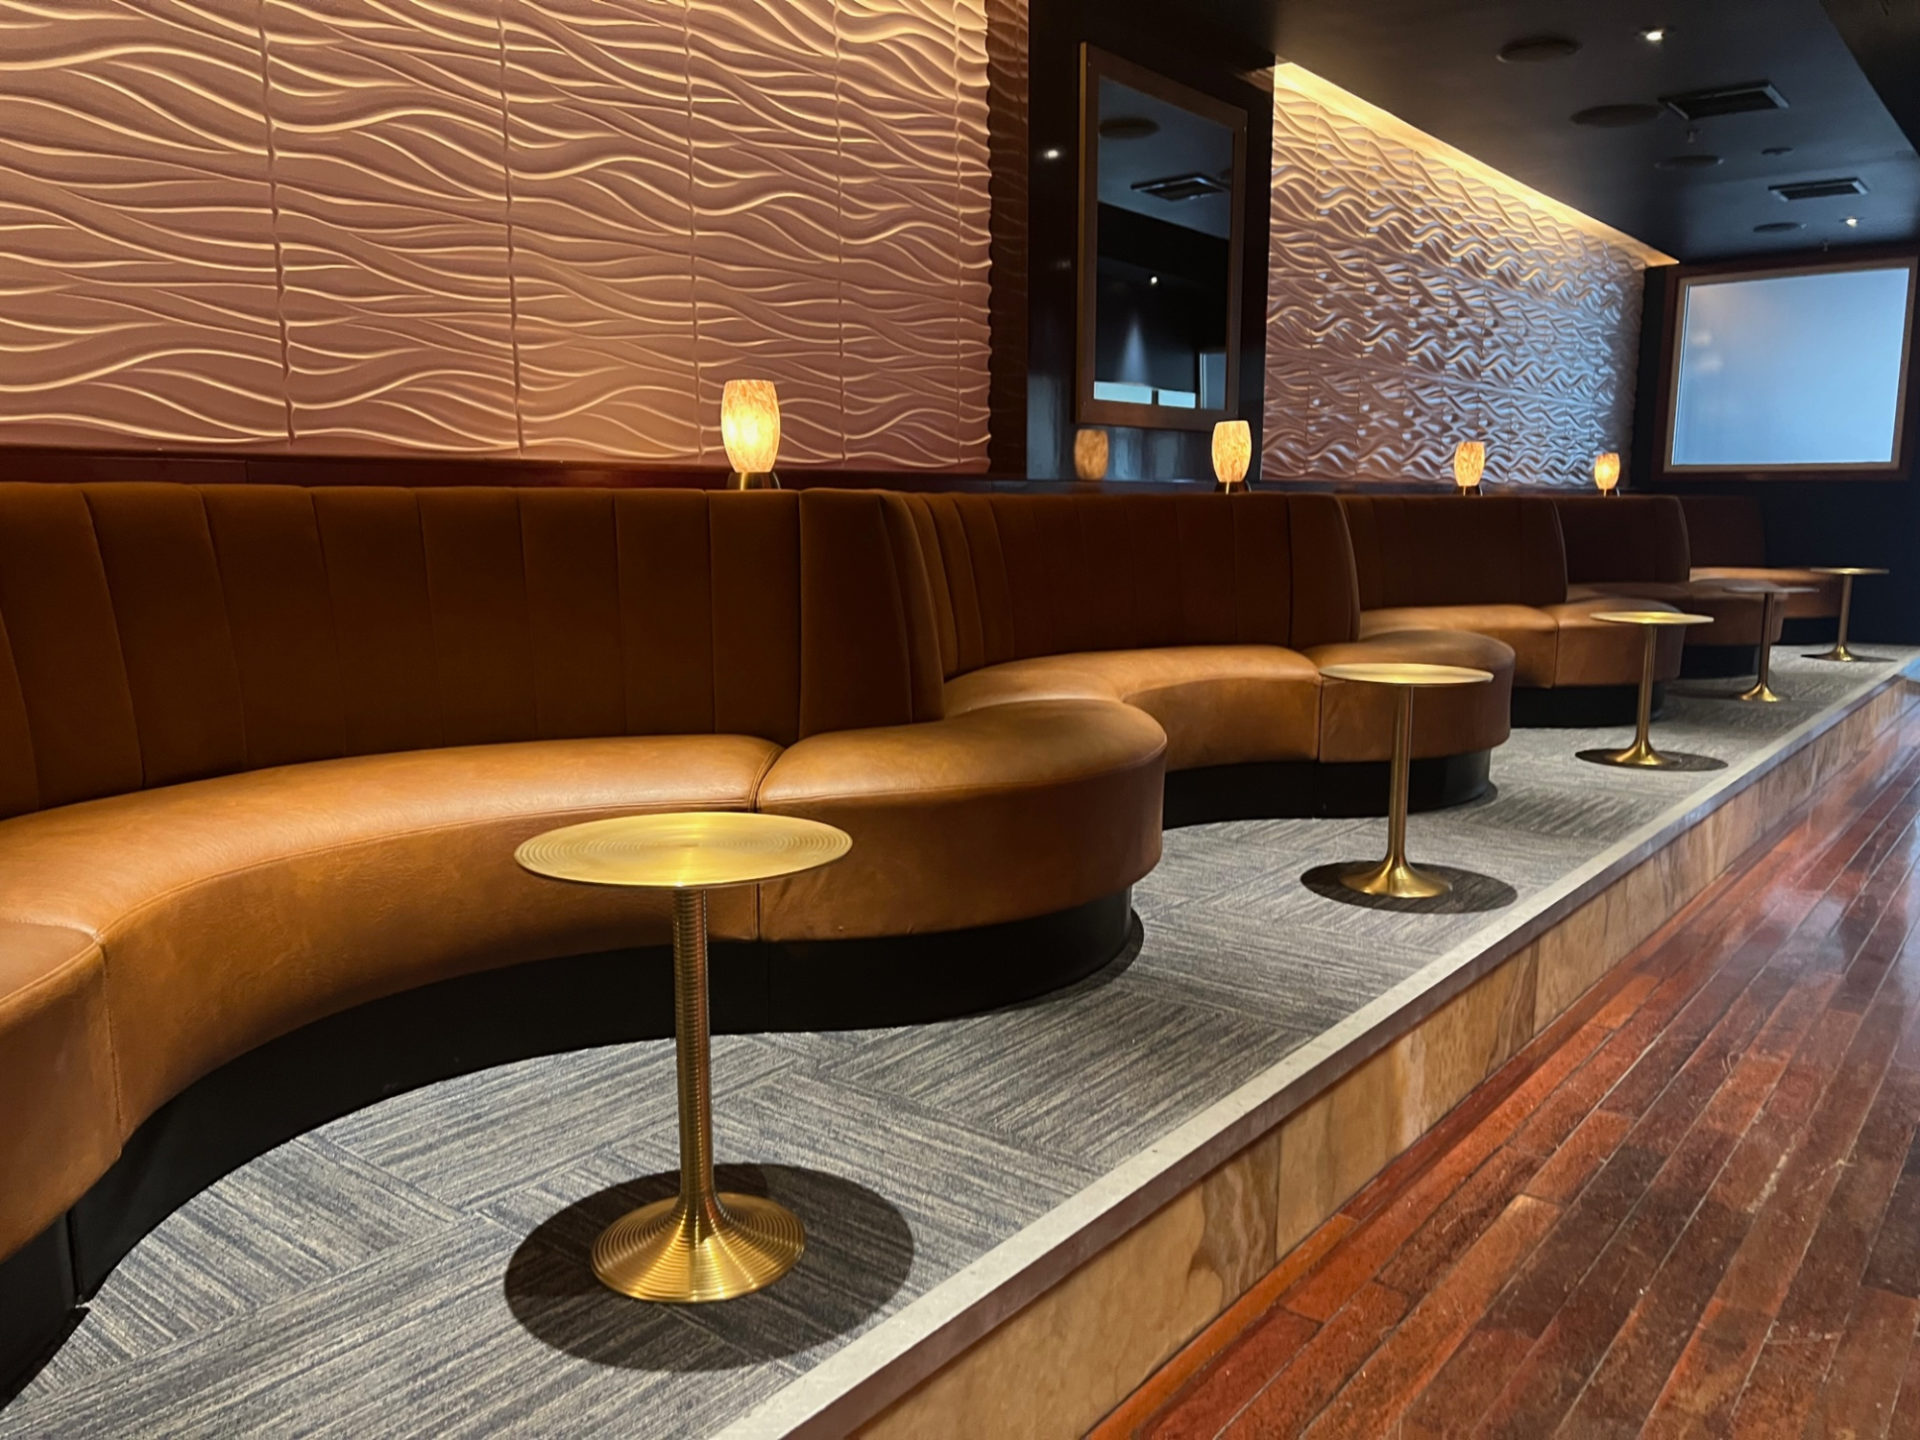 The interior of Anthem bar in Downtown Champaign has brown leatherettes with gold side tables.